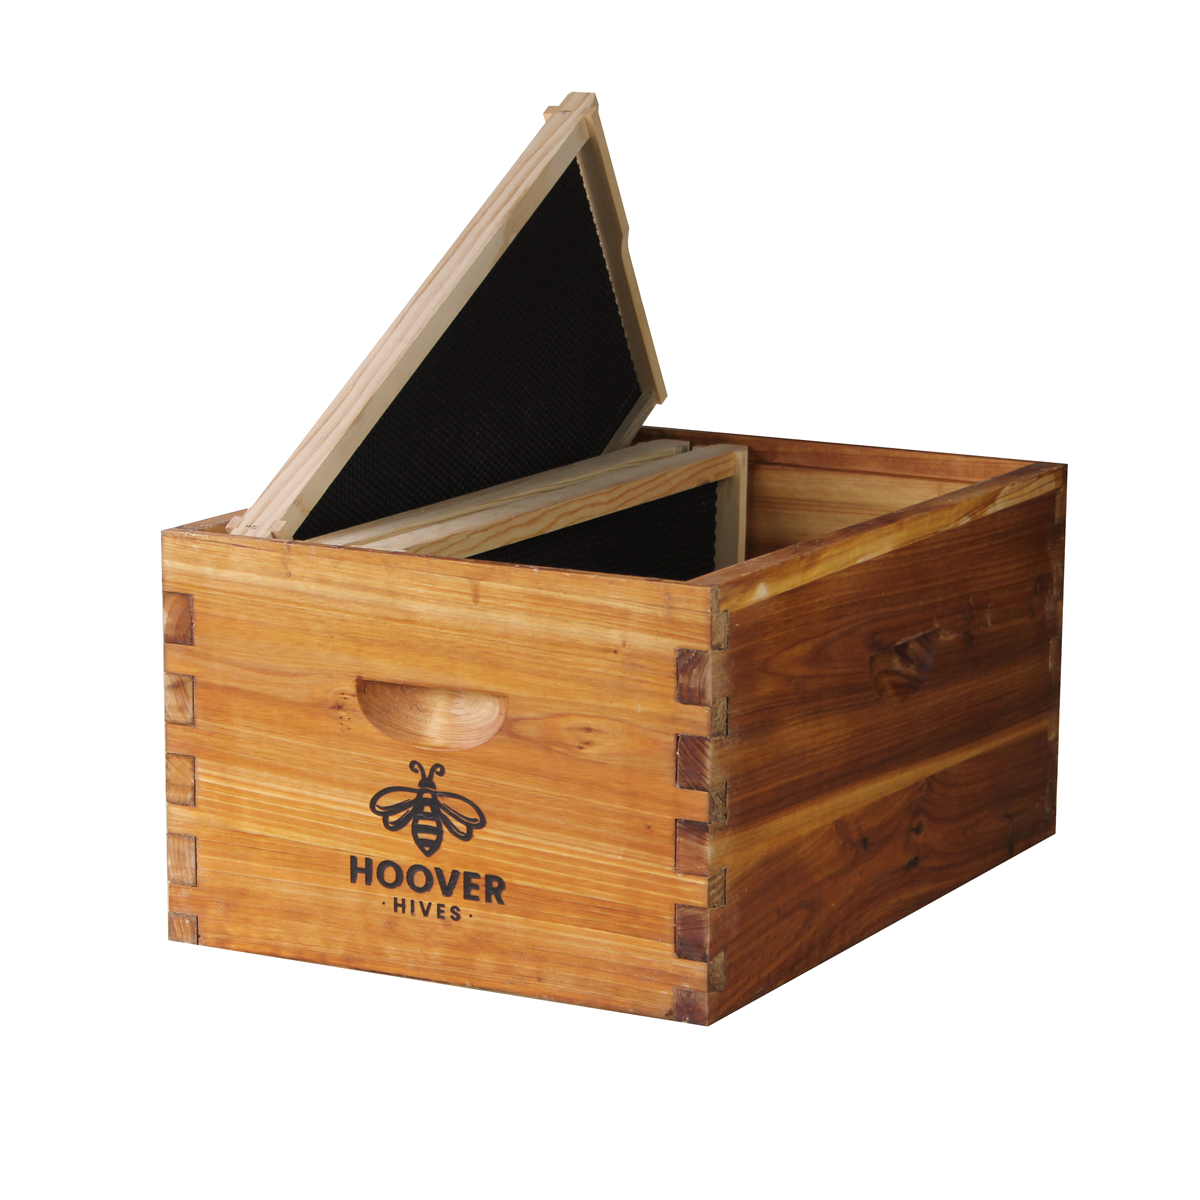 Hoover Hives Wax Coated Deep Brood Box -Size 8 Frame, But Is Nuc-Ready So It Comes With 3 Food Grade Pine Frames